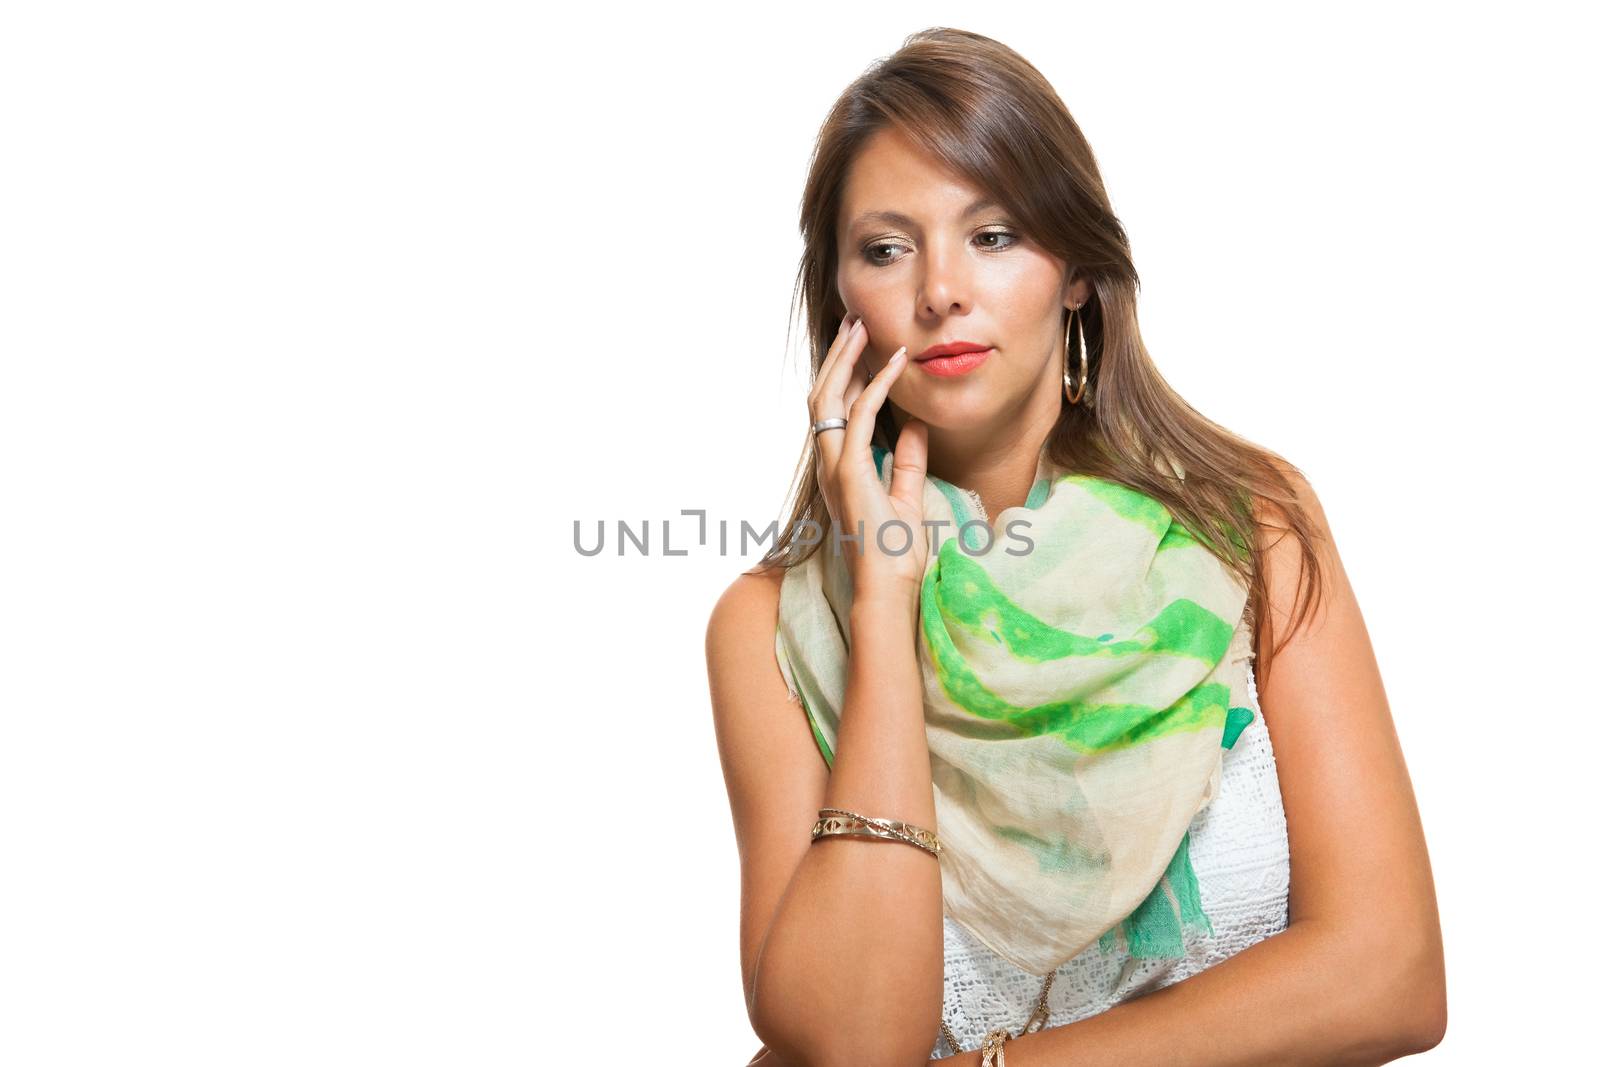 Close up Pensive Pretty Woman in Fashionable Outfit,Touching her Face While Looking Down. Isolated on White Background.